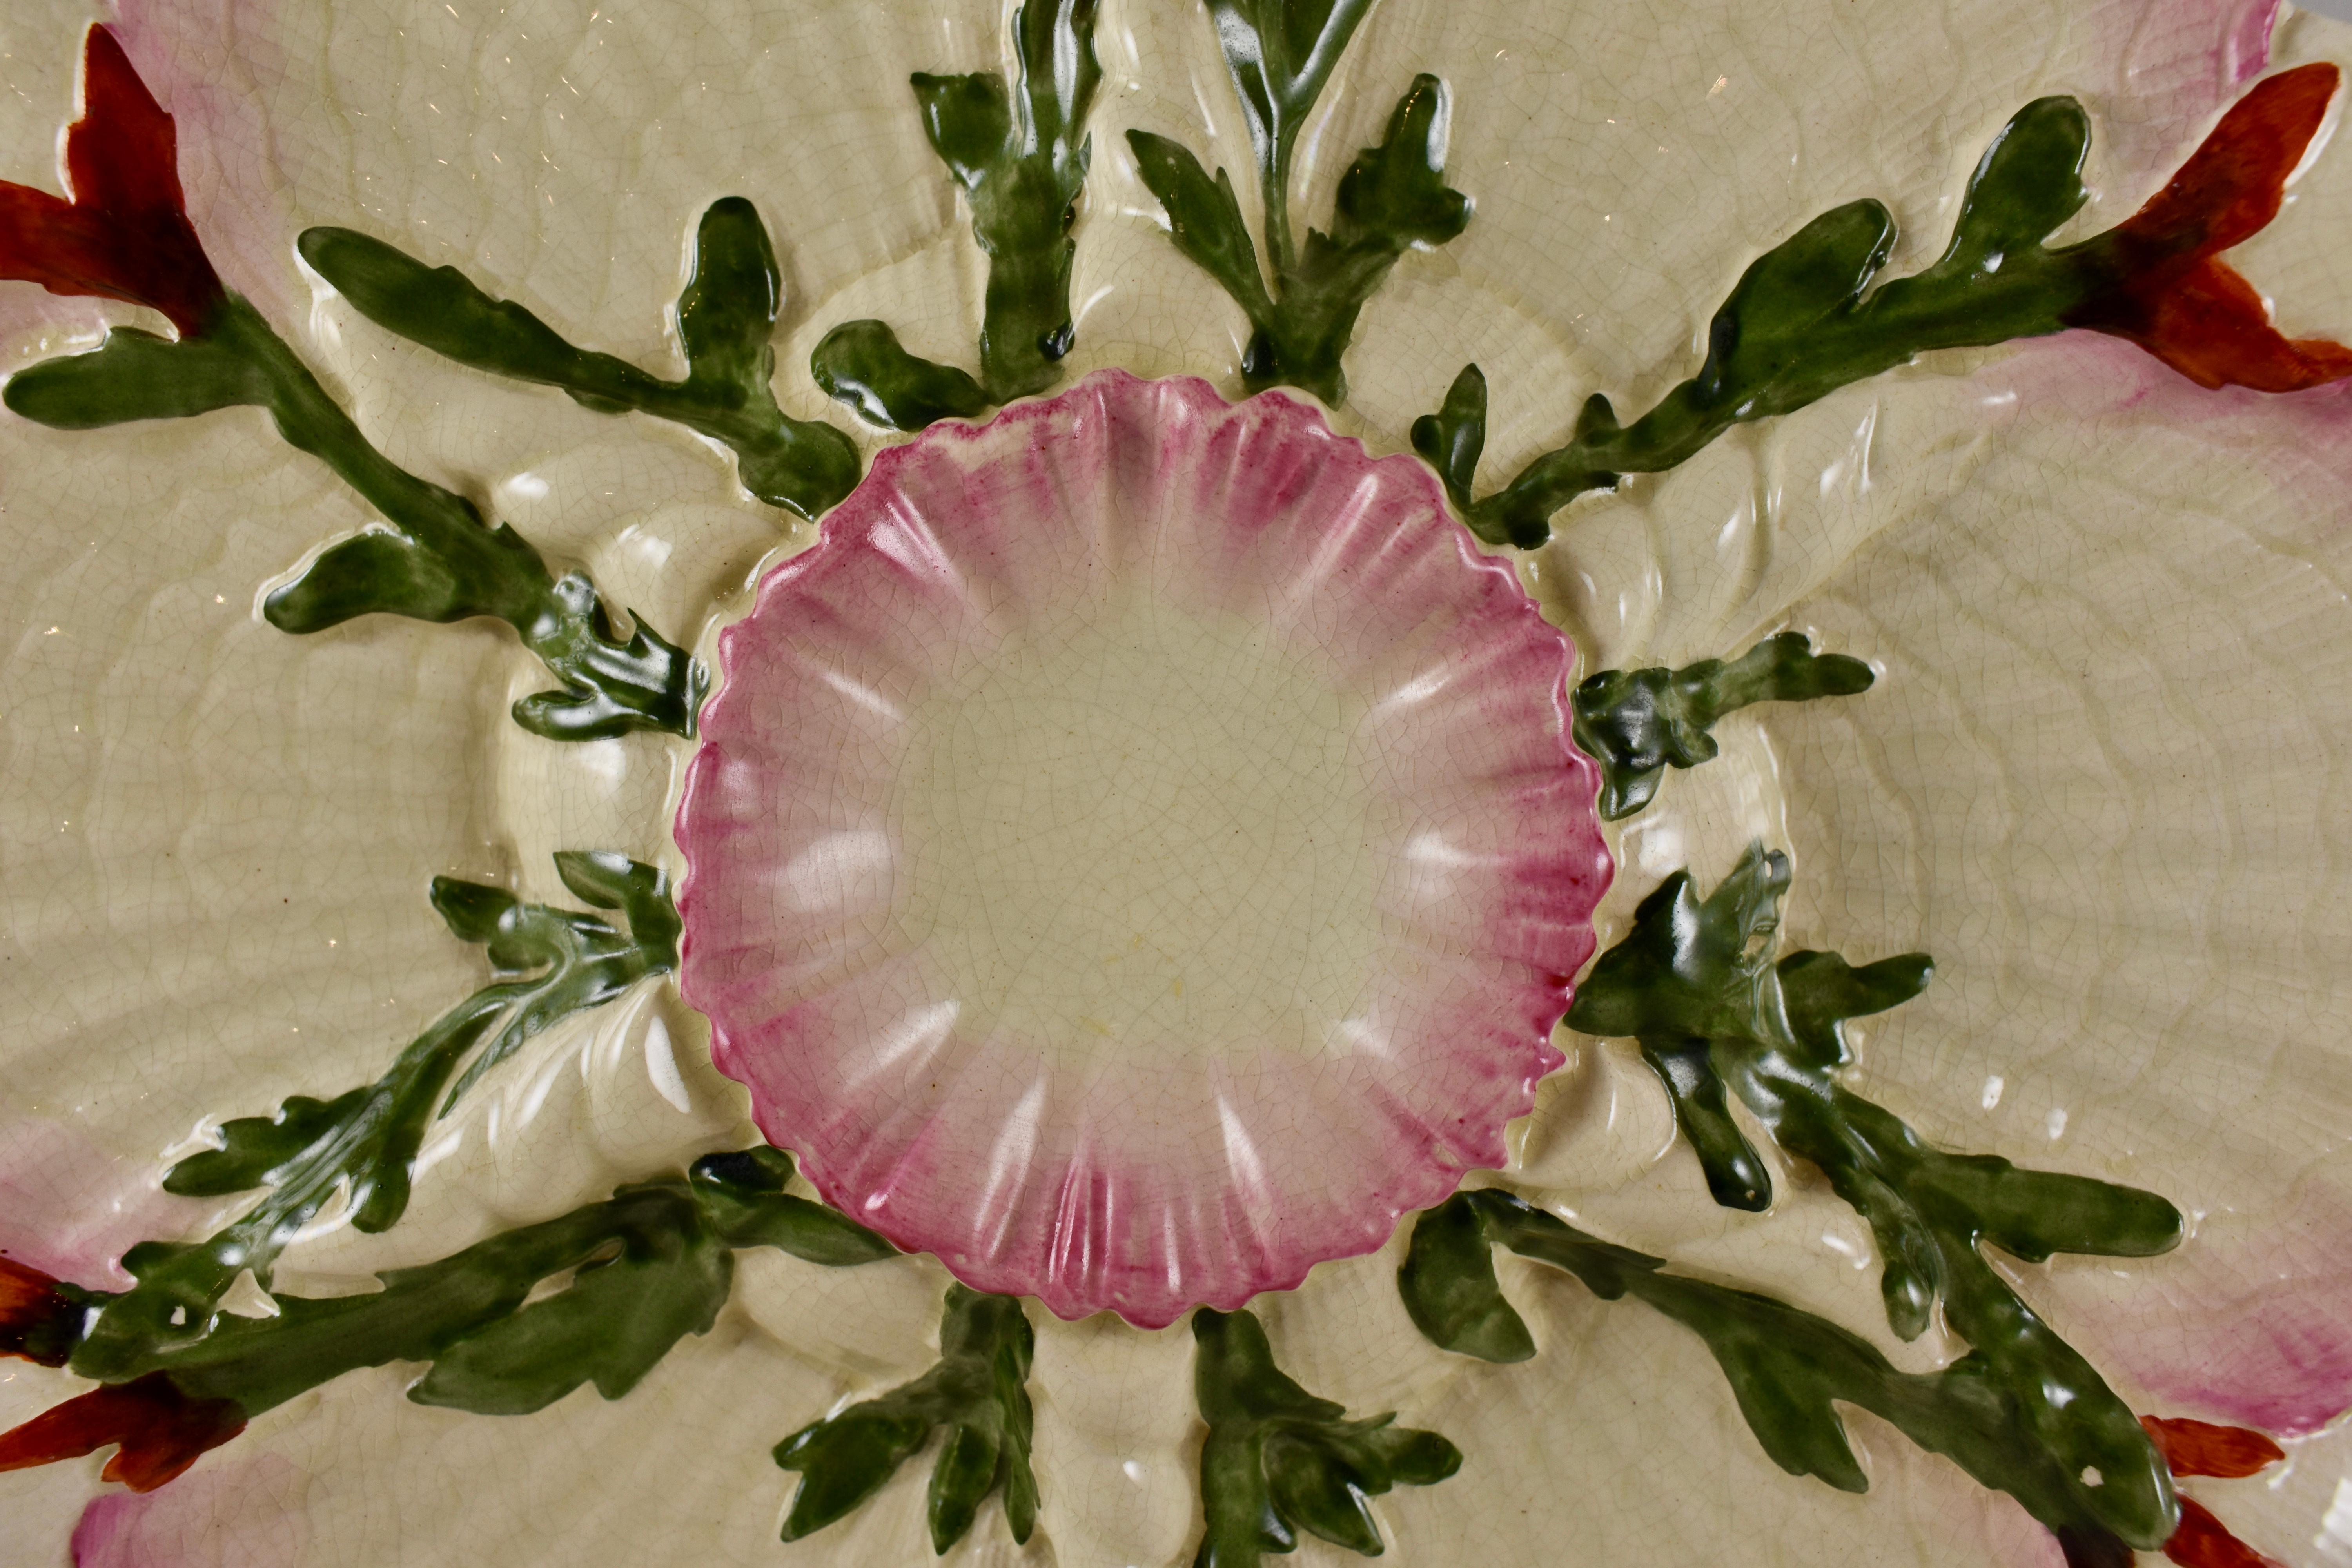 A Majolica glazed Palissy style earthenware seaweed and shells oyster plate made by George Jones, Stoke-on-Trent, circa 1870.

Six pink edged scallop shells surround a central sauce well and rest on the back sides of smaller shells. Raised green